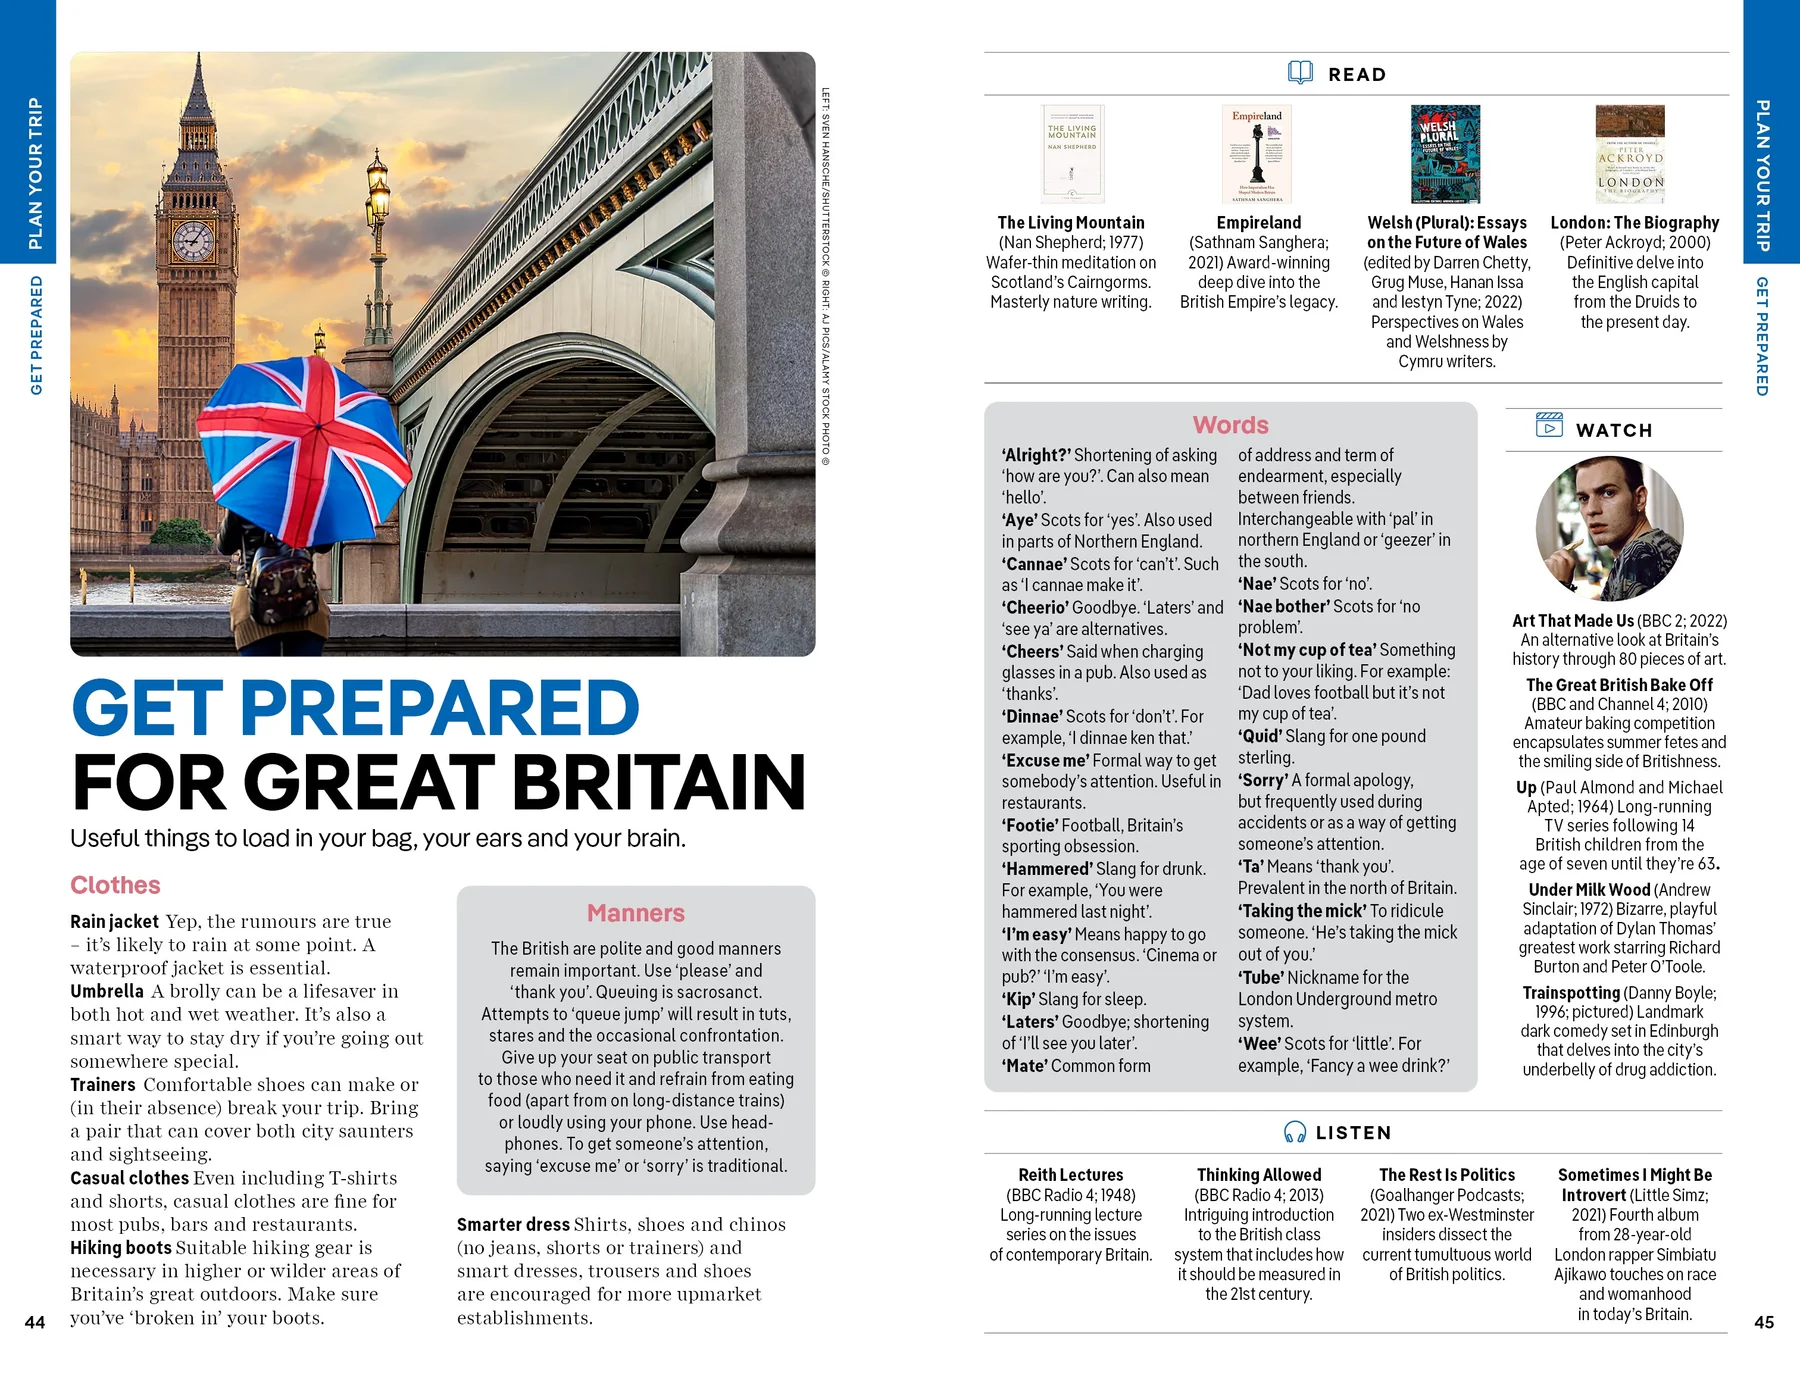 Great Britain Lonely Planet